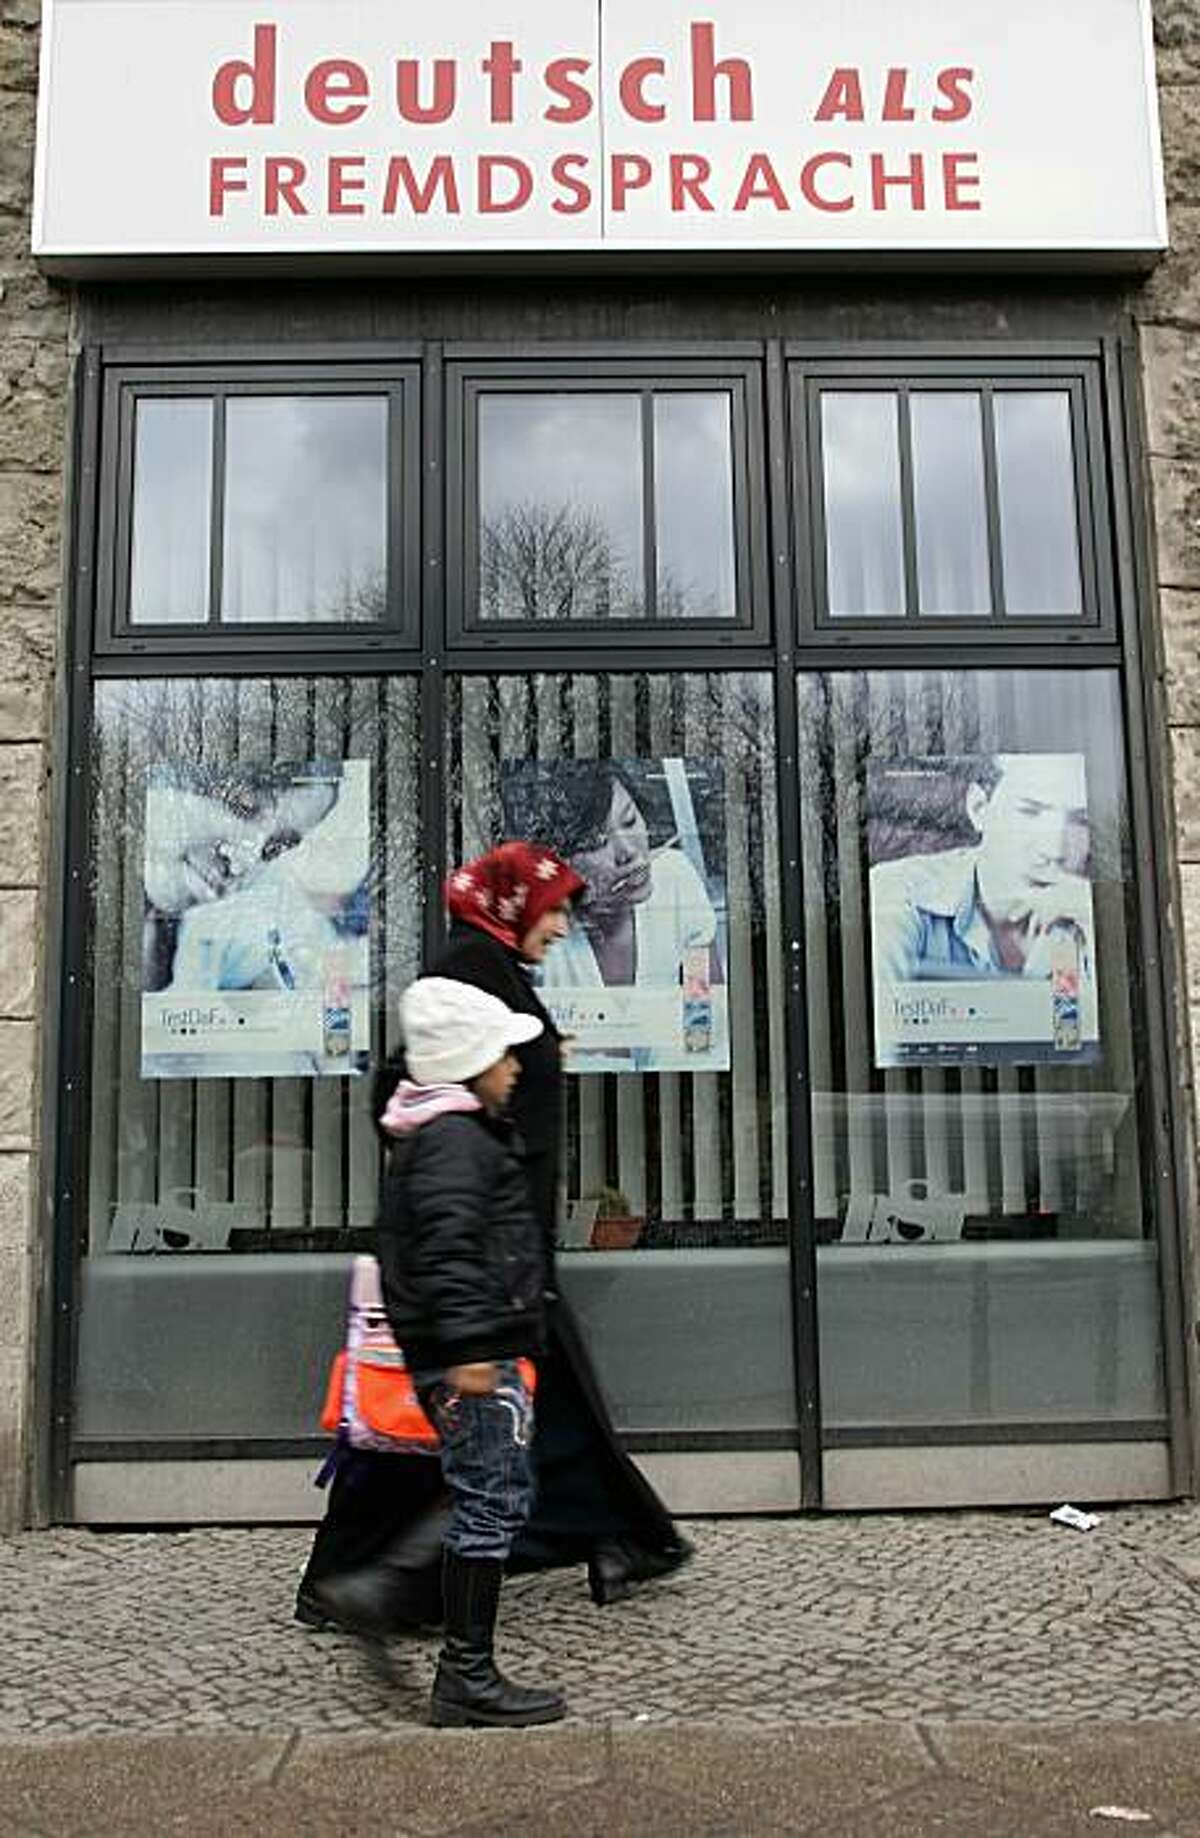 BERLIN, GERMANY - JANUARY 27: A muslim woman wearing a headscarf and her child walk past a sign of a language school that reads 'German as foreign language' in the immigrant-heavy district of Kreuzberg on January 27, 2011 in Berlin, Germany. German politicians are debating past and future govenment policies to encourage the integration of immigrants into German society, a debate that was most recently sparked by a controversial book by German Social Democrat (SPD) Thilo Sarrazin, in which he accuses Muslims of being more reluctant to integrate than other immigrant groups.